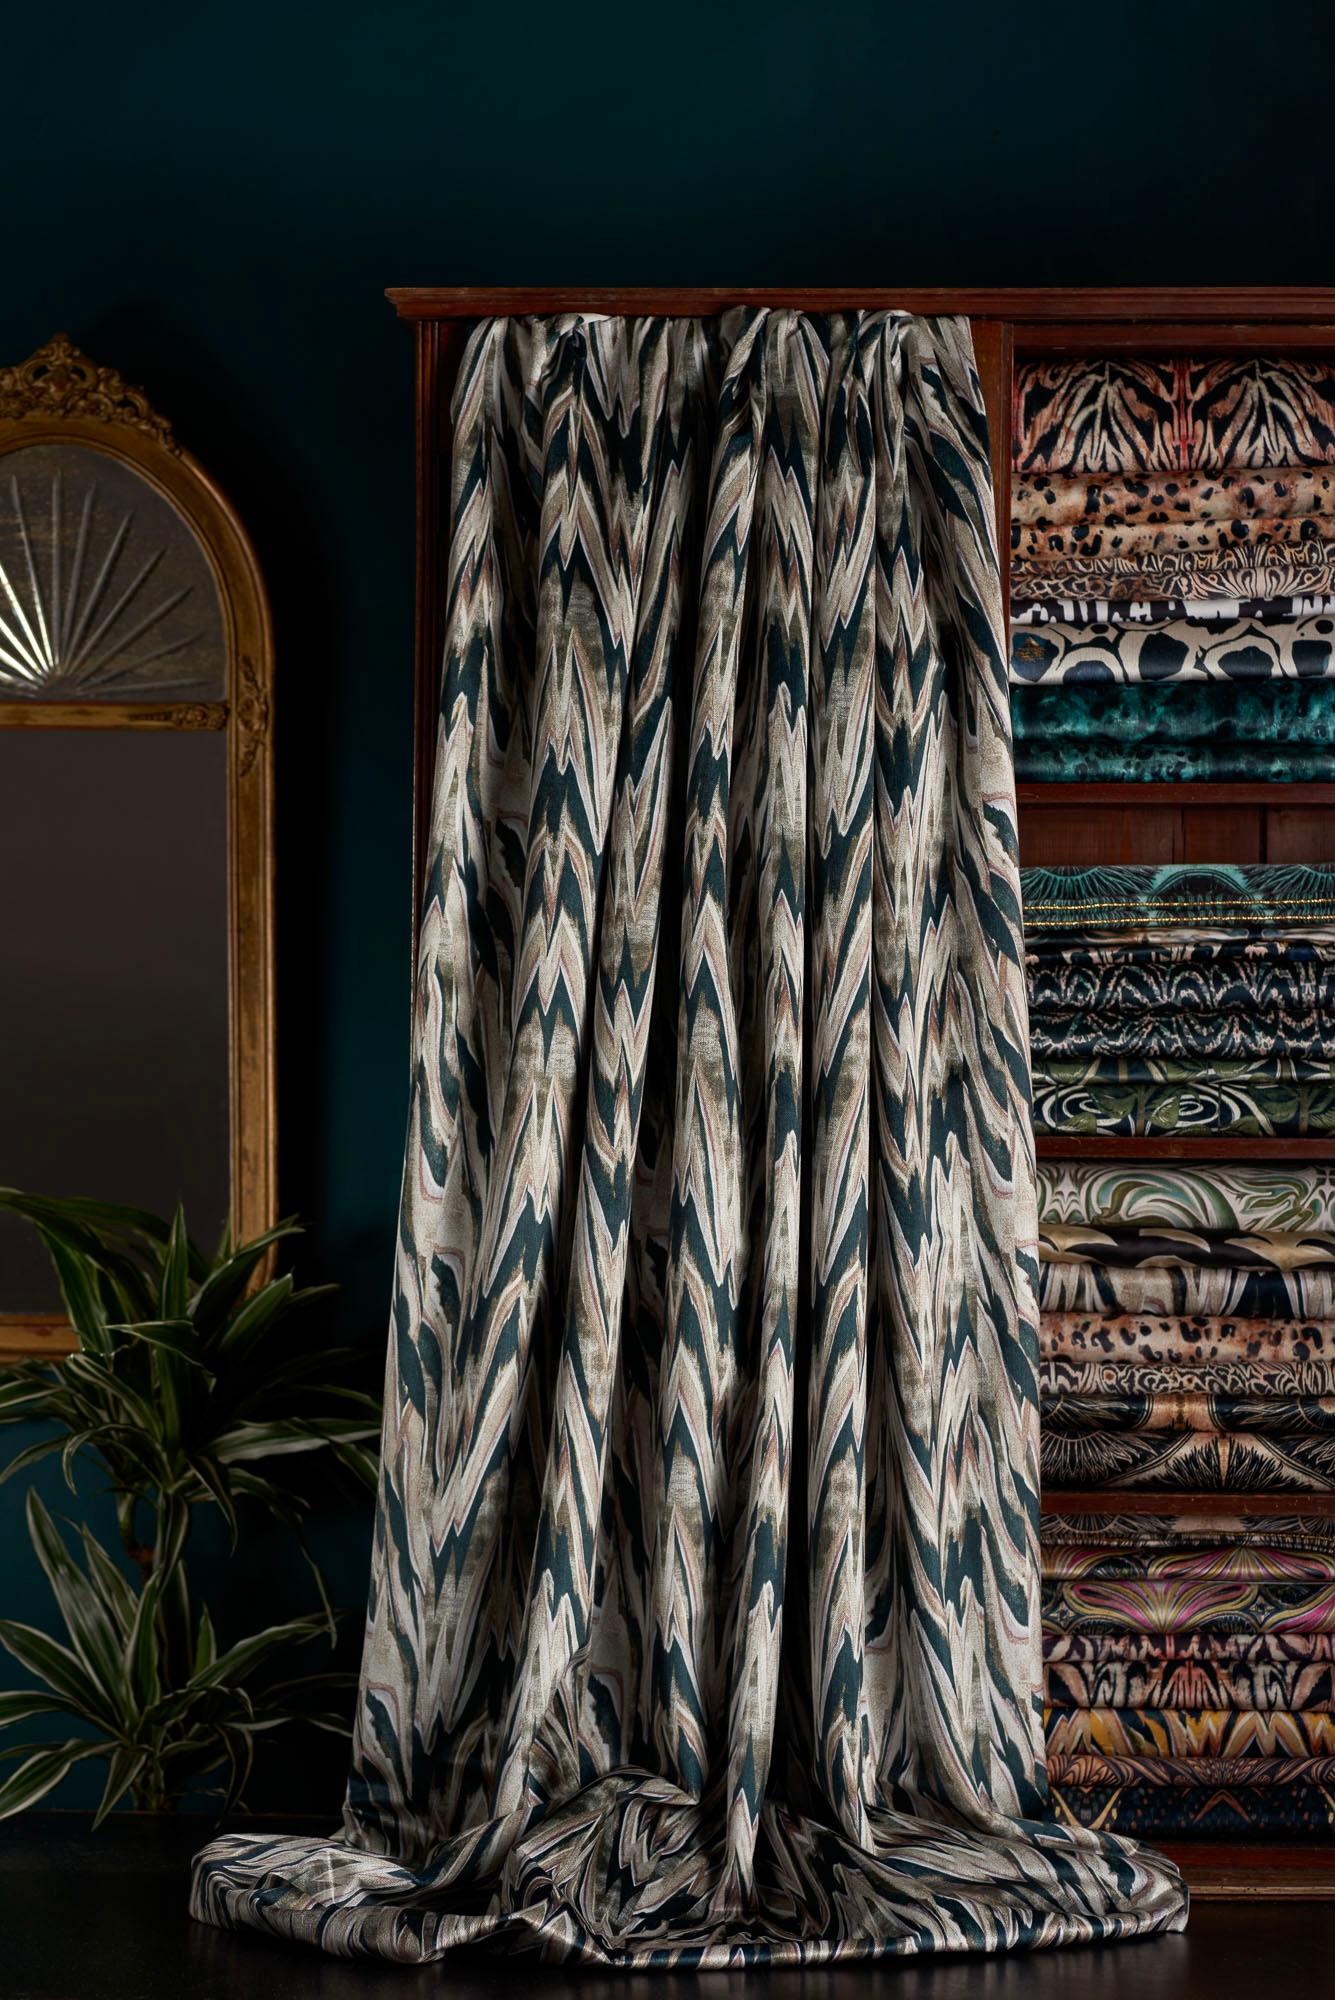 Our take on a tiger print – Makemba Mink is a bold and distinctive design in a neutral palette of mushroom, black and cream.

This velvet is midweight, with a strong straight woven backing, so is suitable for upholstery, but is also light enough